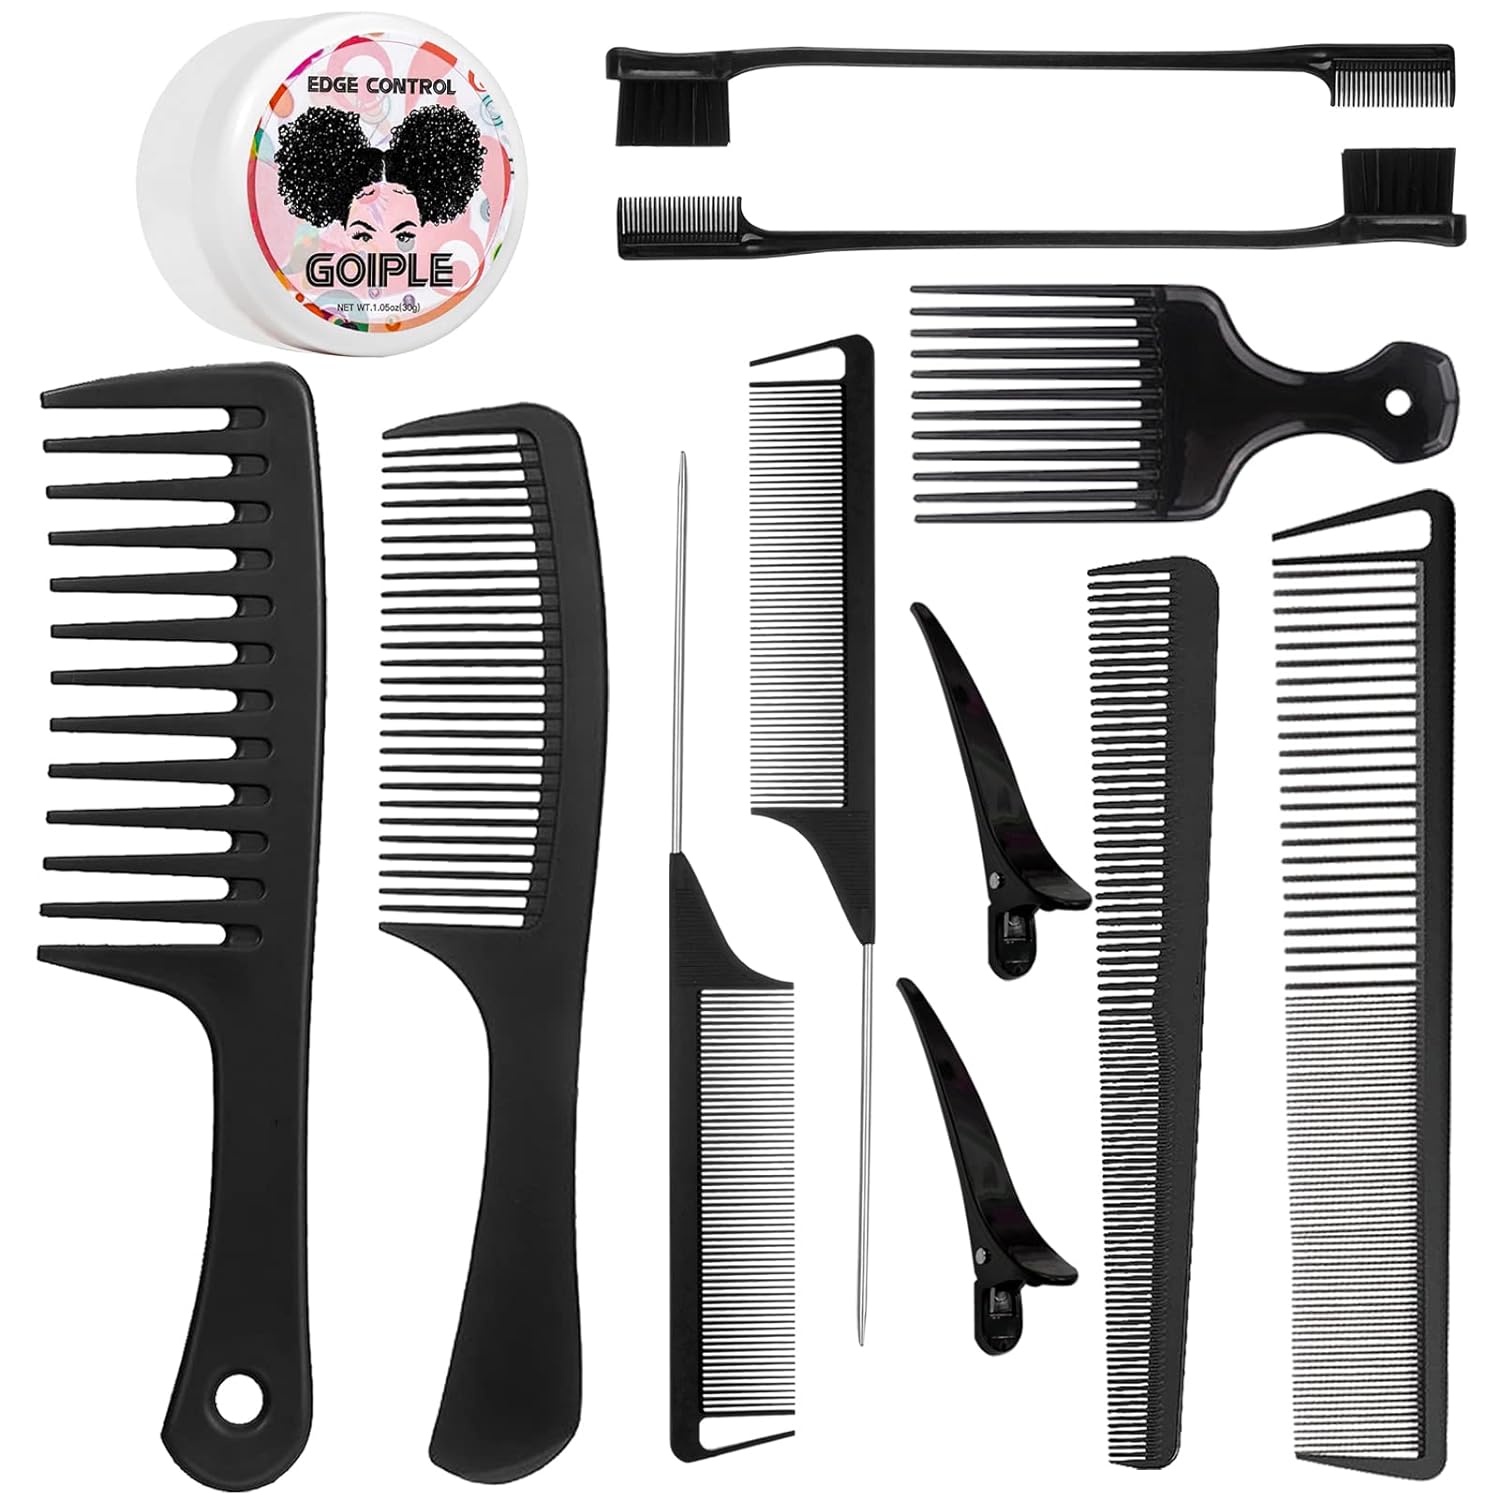 Styling Hair Comb 11PCS Professional Styling Comb Set for Women Men